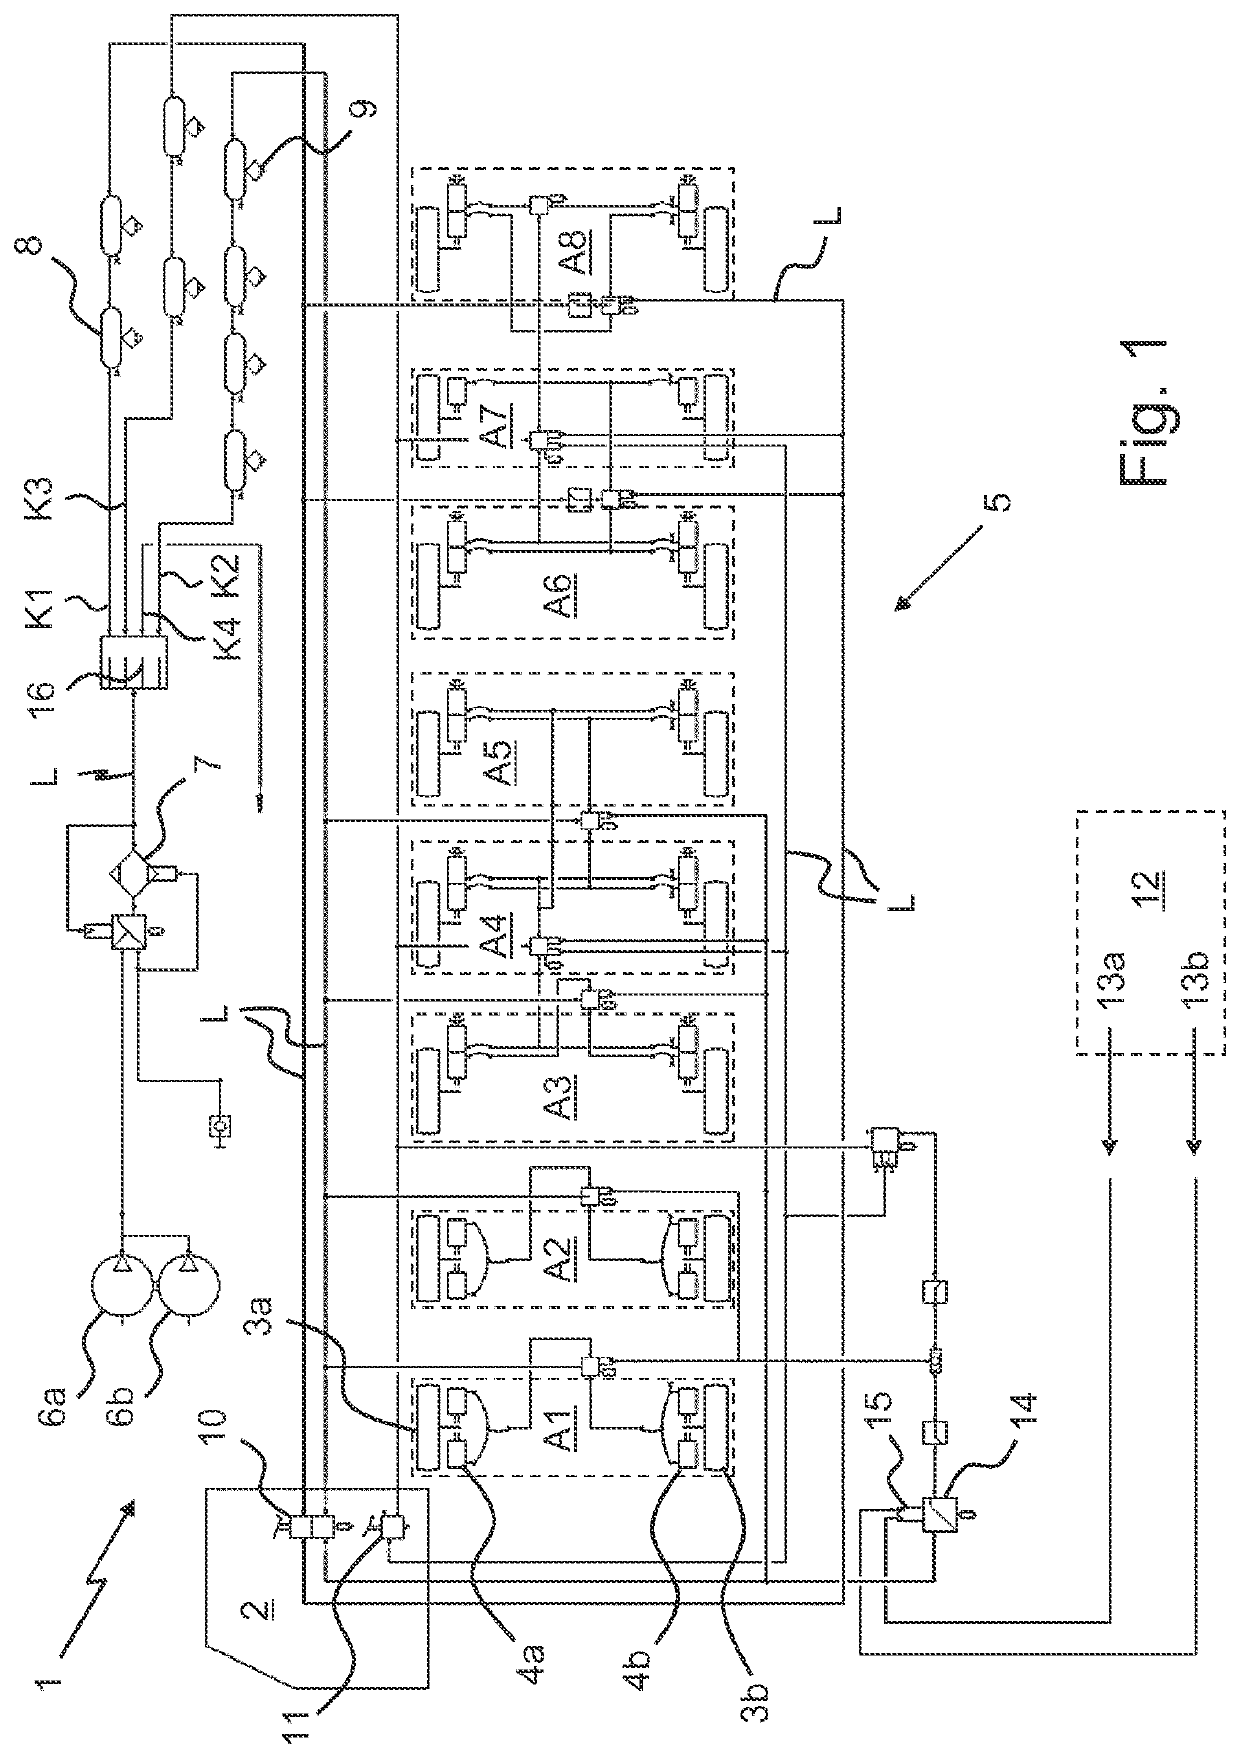 Vehicle crane having hydropneumatic suspension and a braking system comprising at least two braking circuits